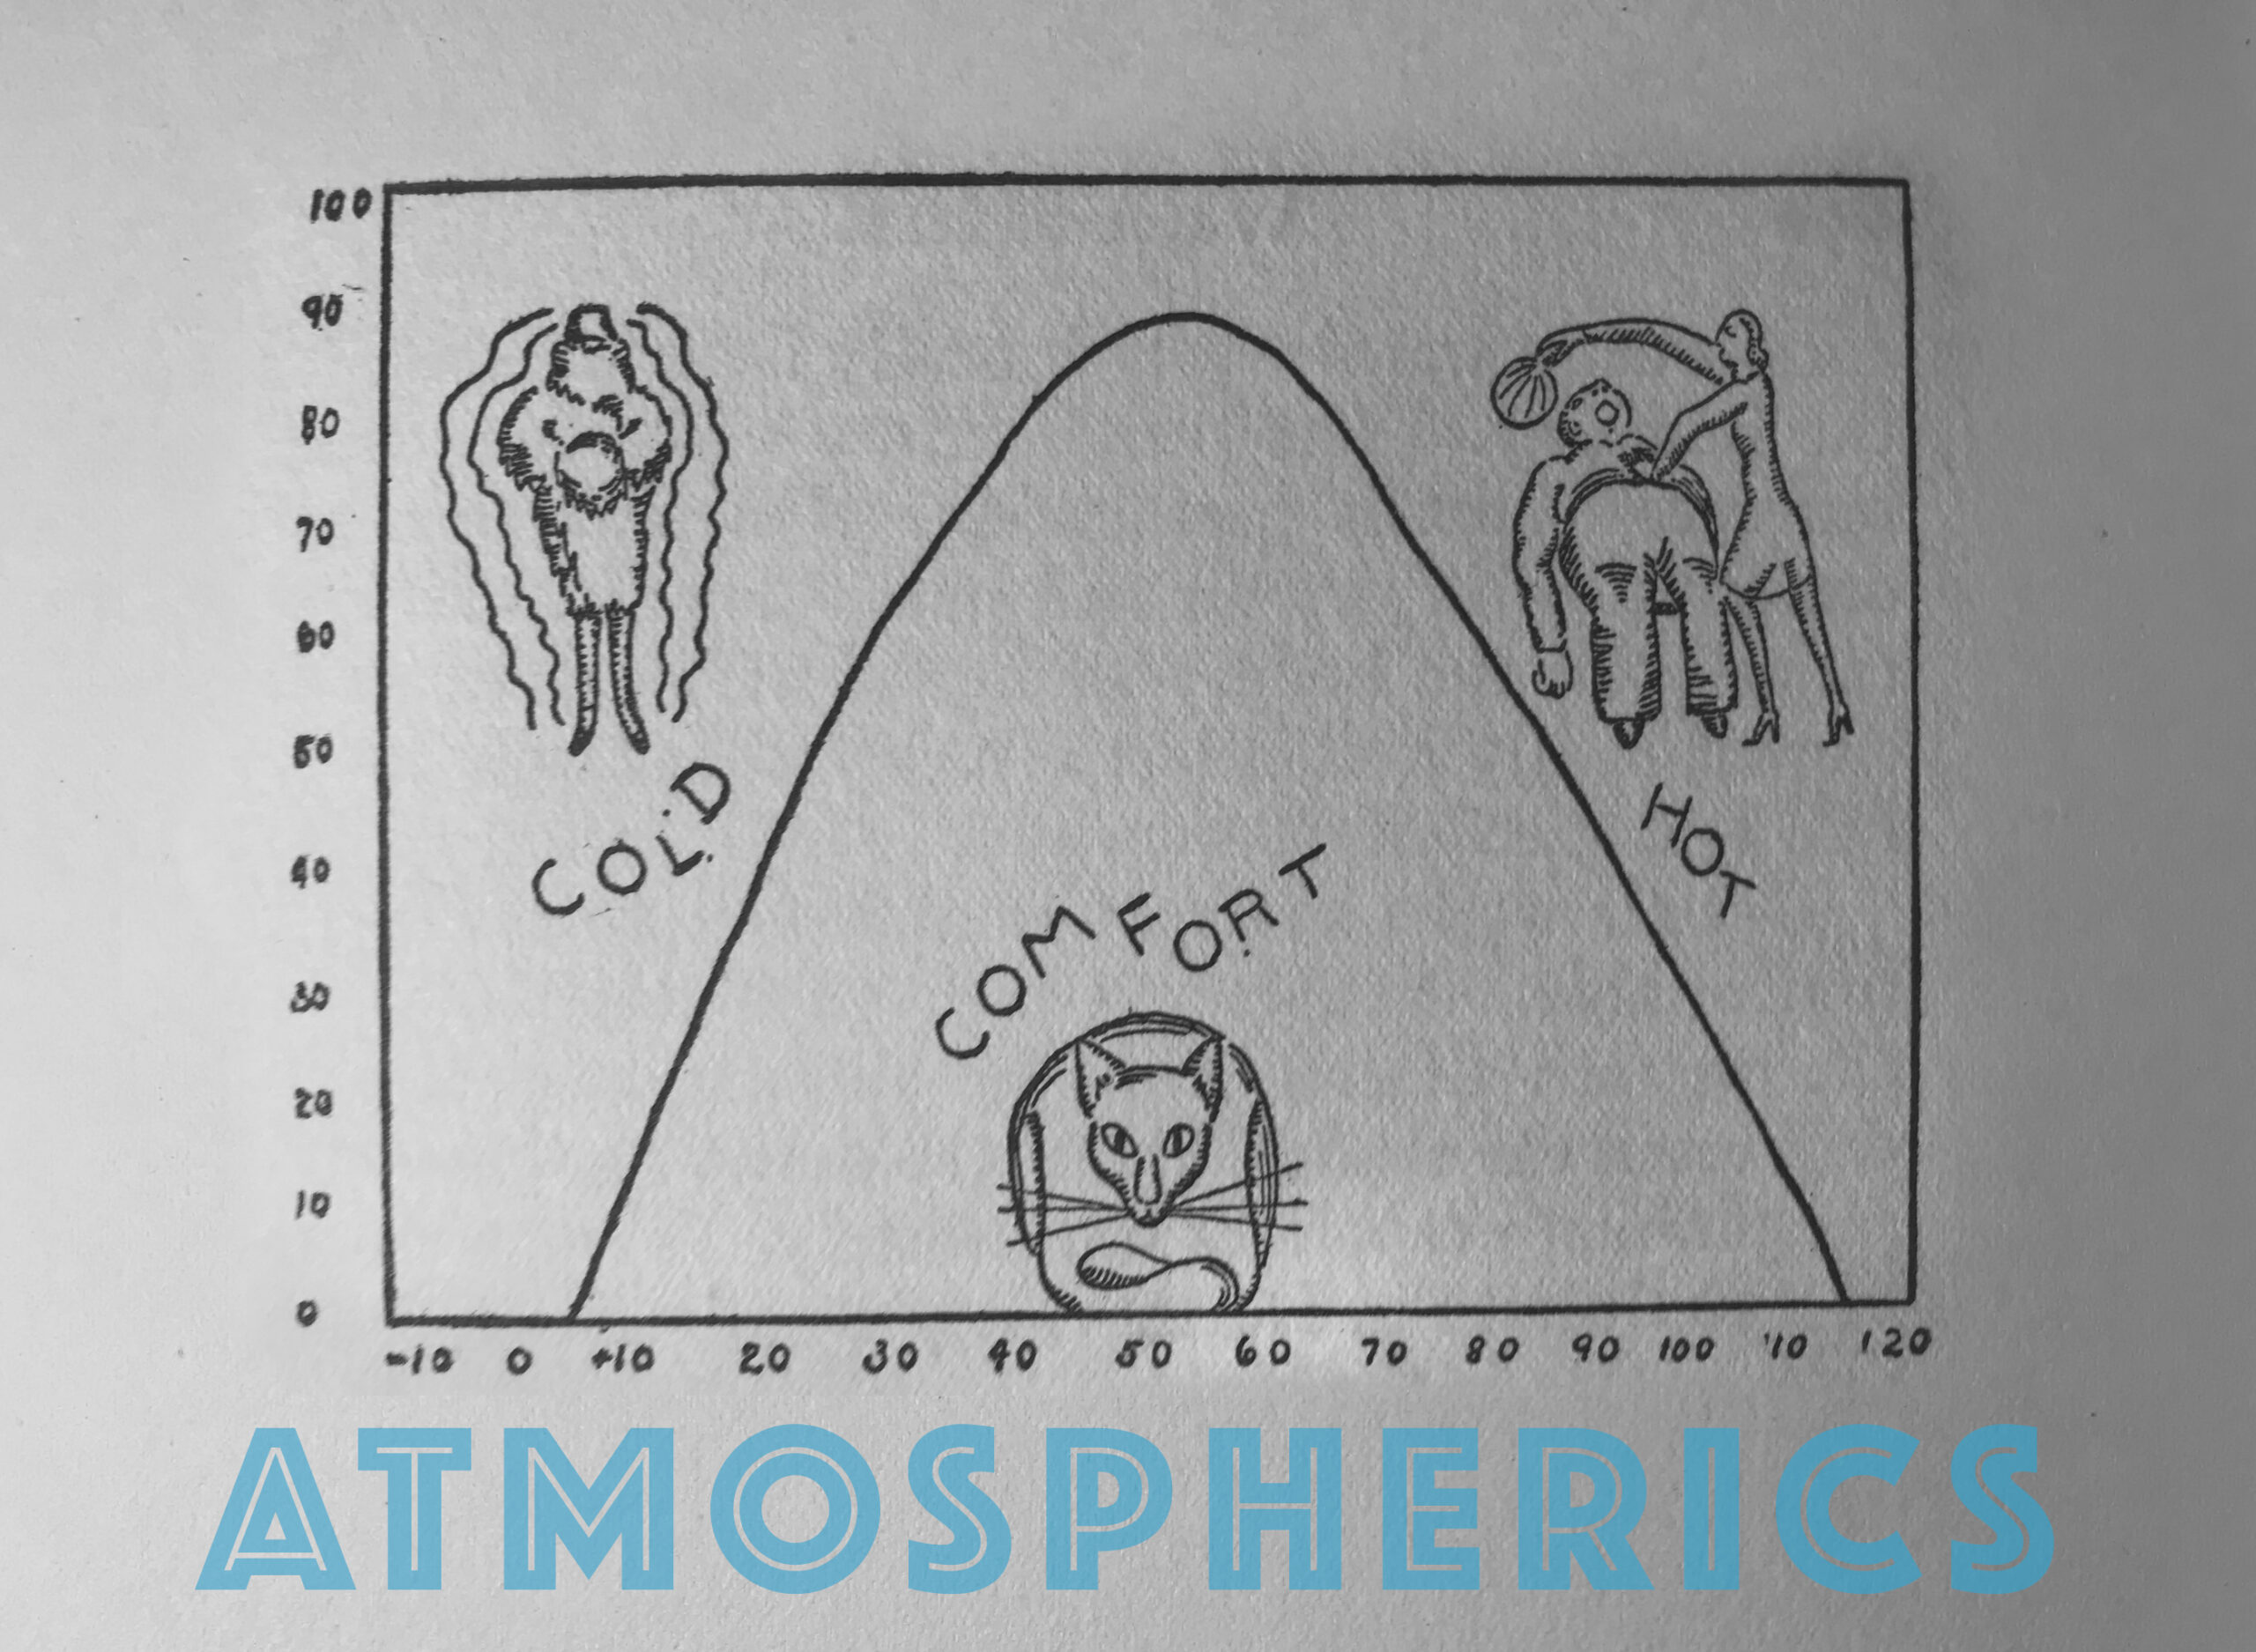 Decorative image with "atmospherics" title and image of a jokey graph depicting cold, comfort, and hot.